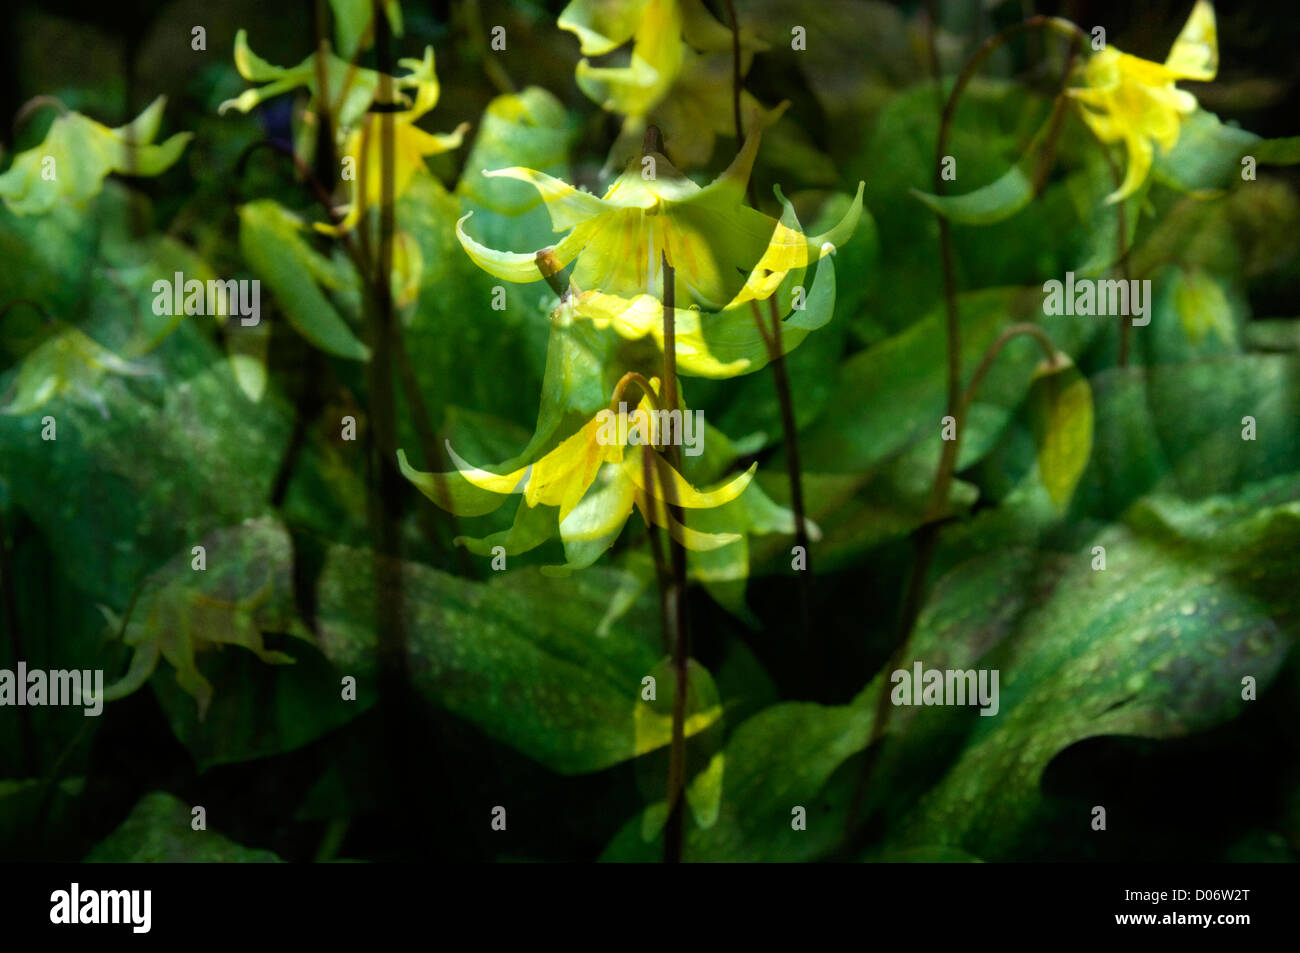 Yellow Dog's Tooth Violets Erythronium dens-canis flowers in a Digital Art Composite Stock Photo